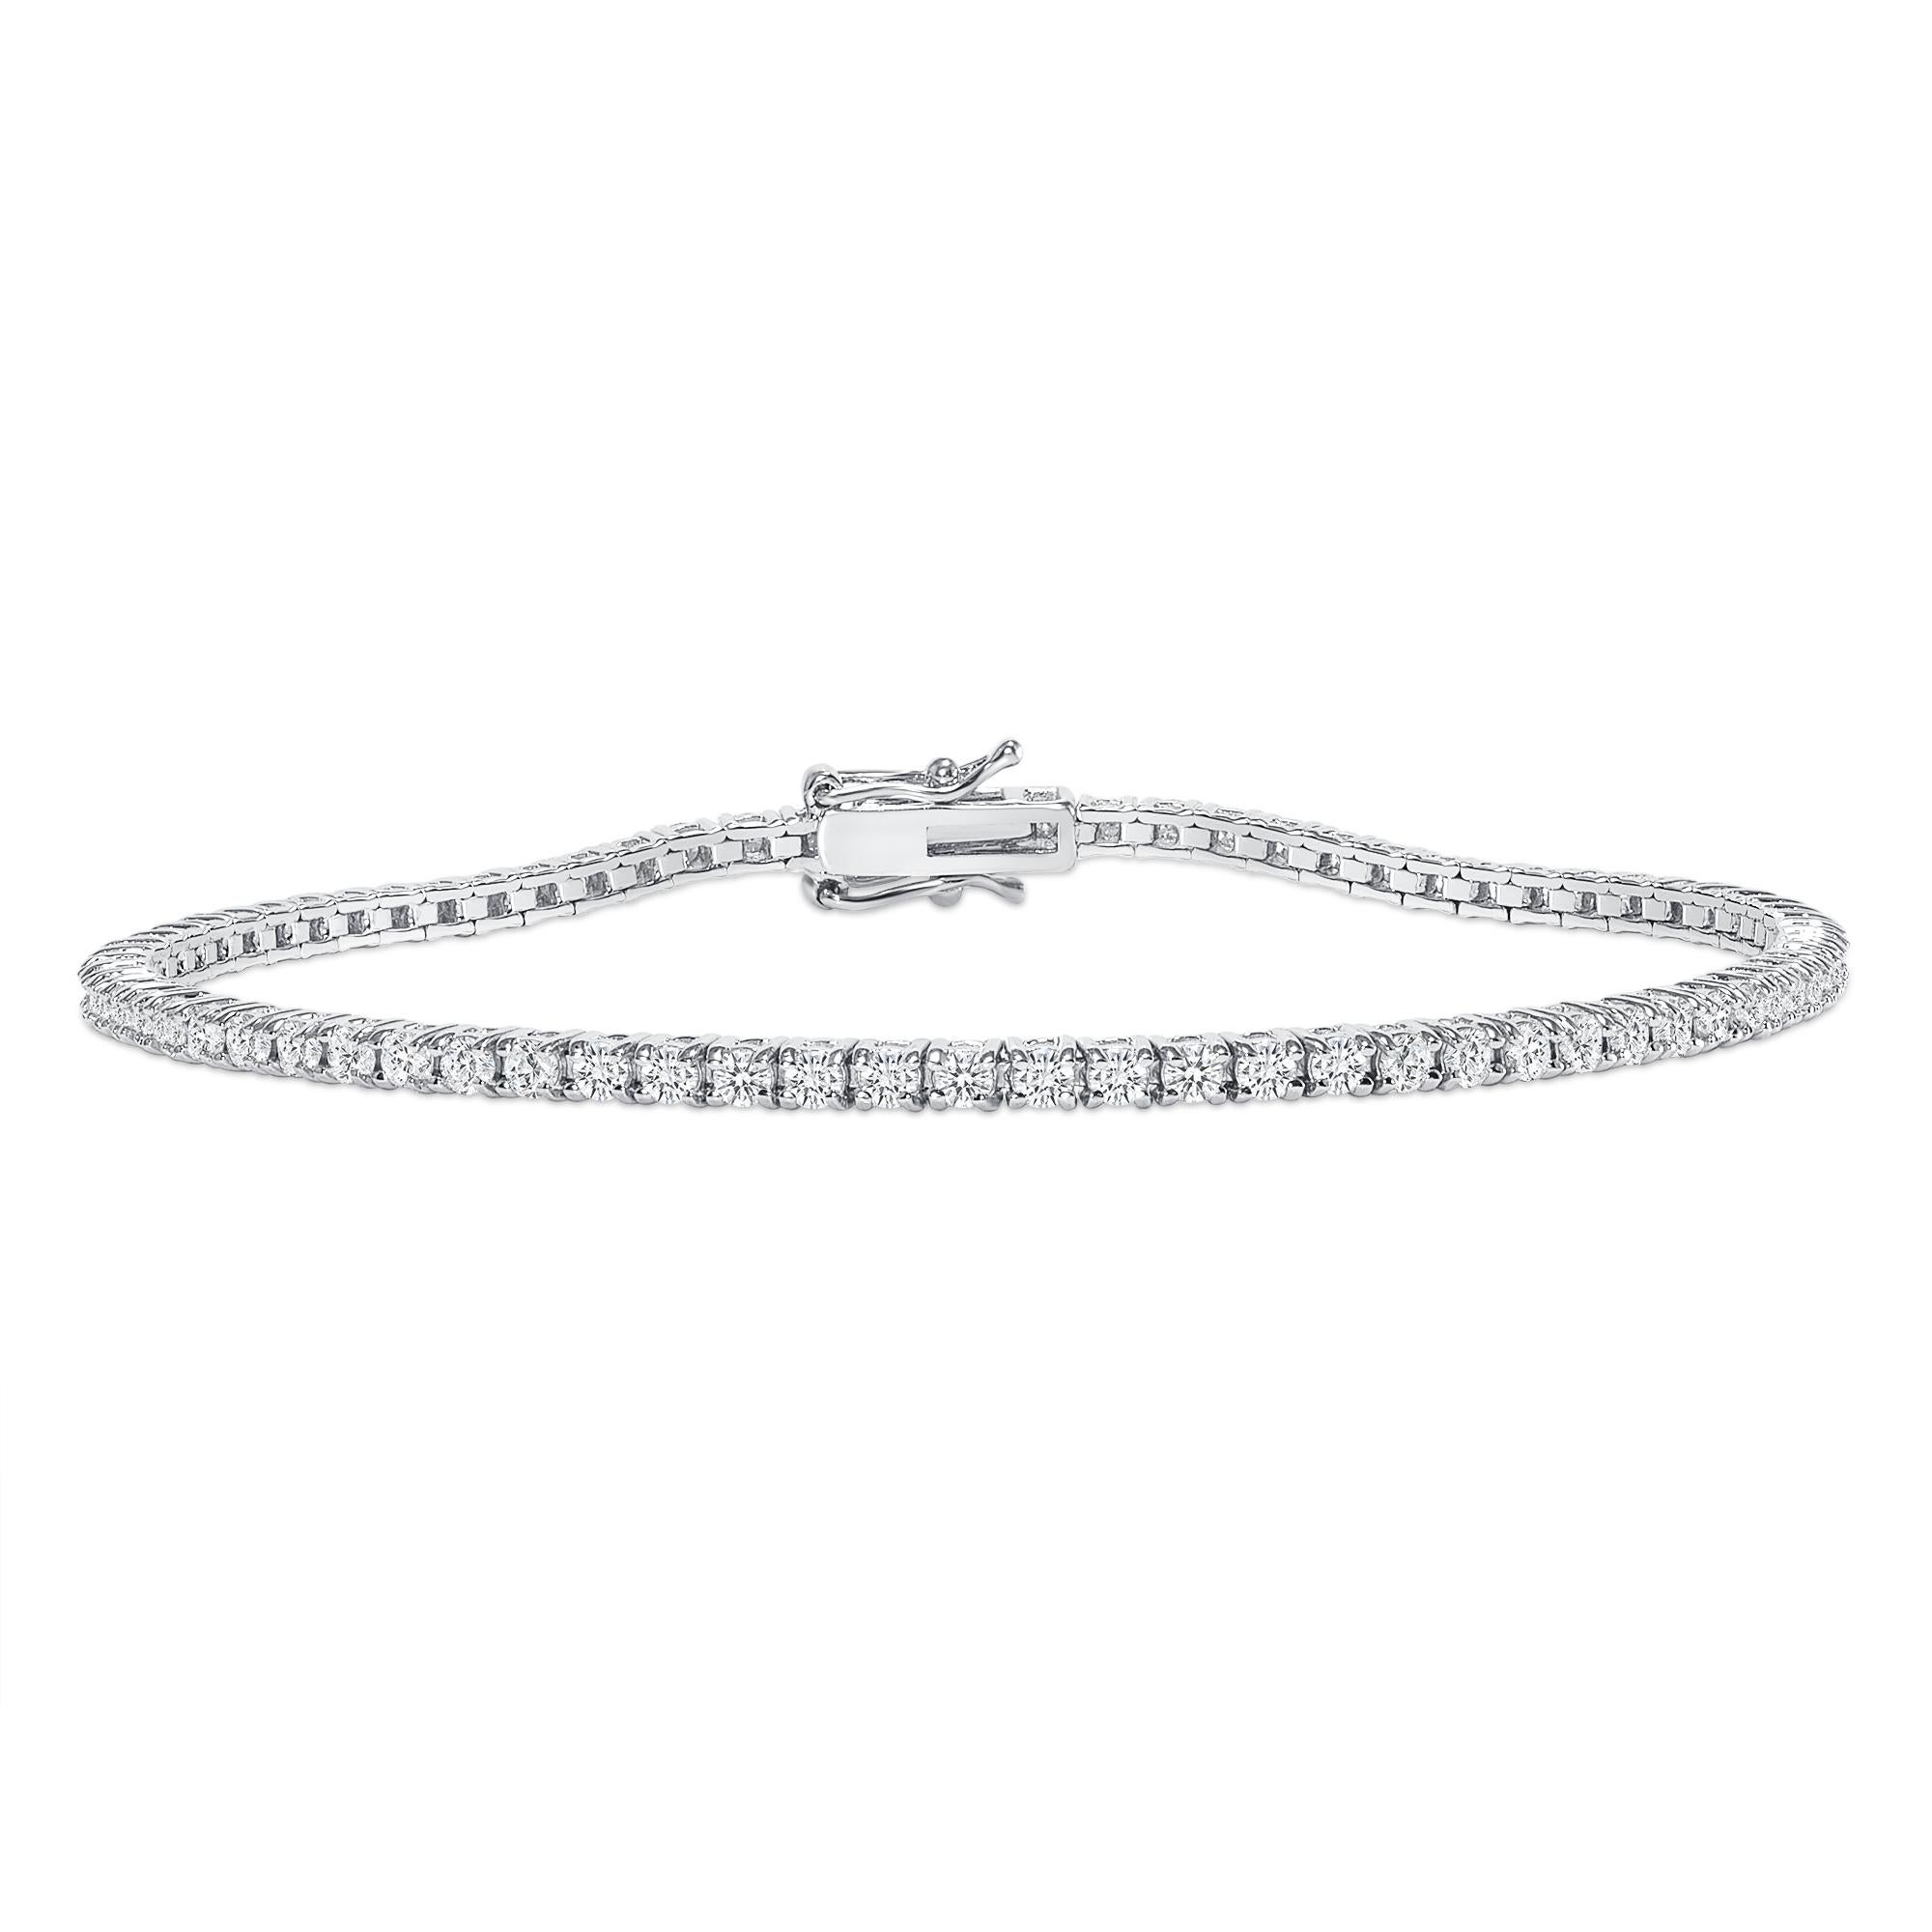 This diamond tennis bracelet features beautifully cut round diamonds set gorgeously in 14k gold.

Metal: 14k Gold
Diamond Cut: Round Natural Diamond 
Total Diamond Carats: 3ct
Diamond Clarity: VS
Diamond Color: F-G
Color: White Gold
Bracelet Length: